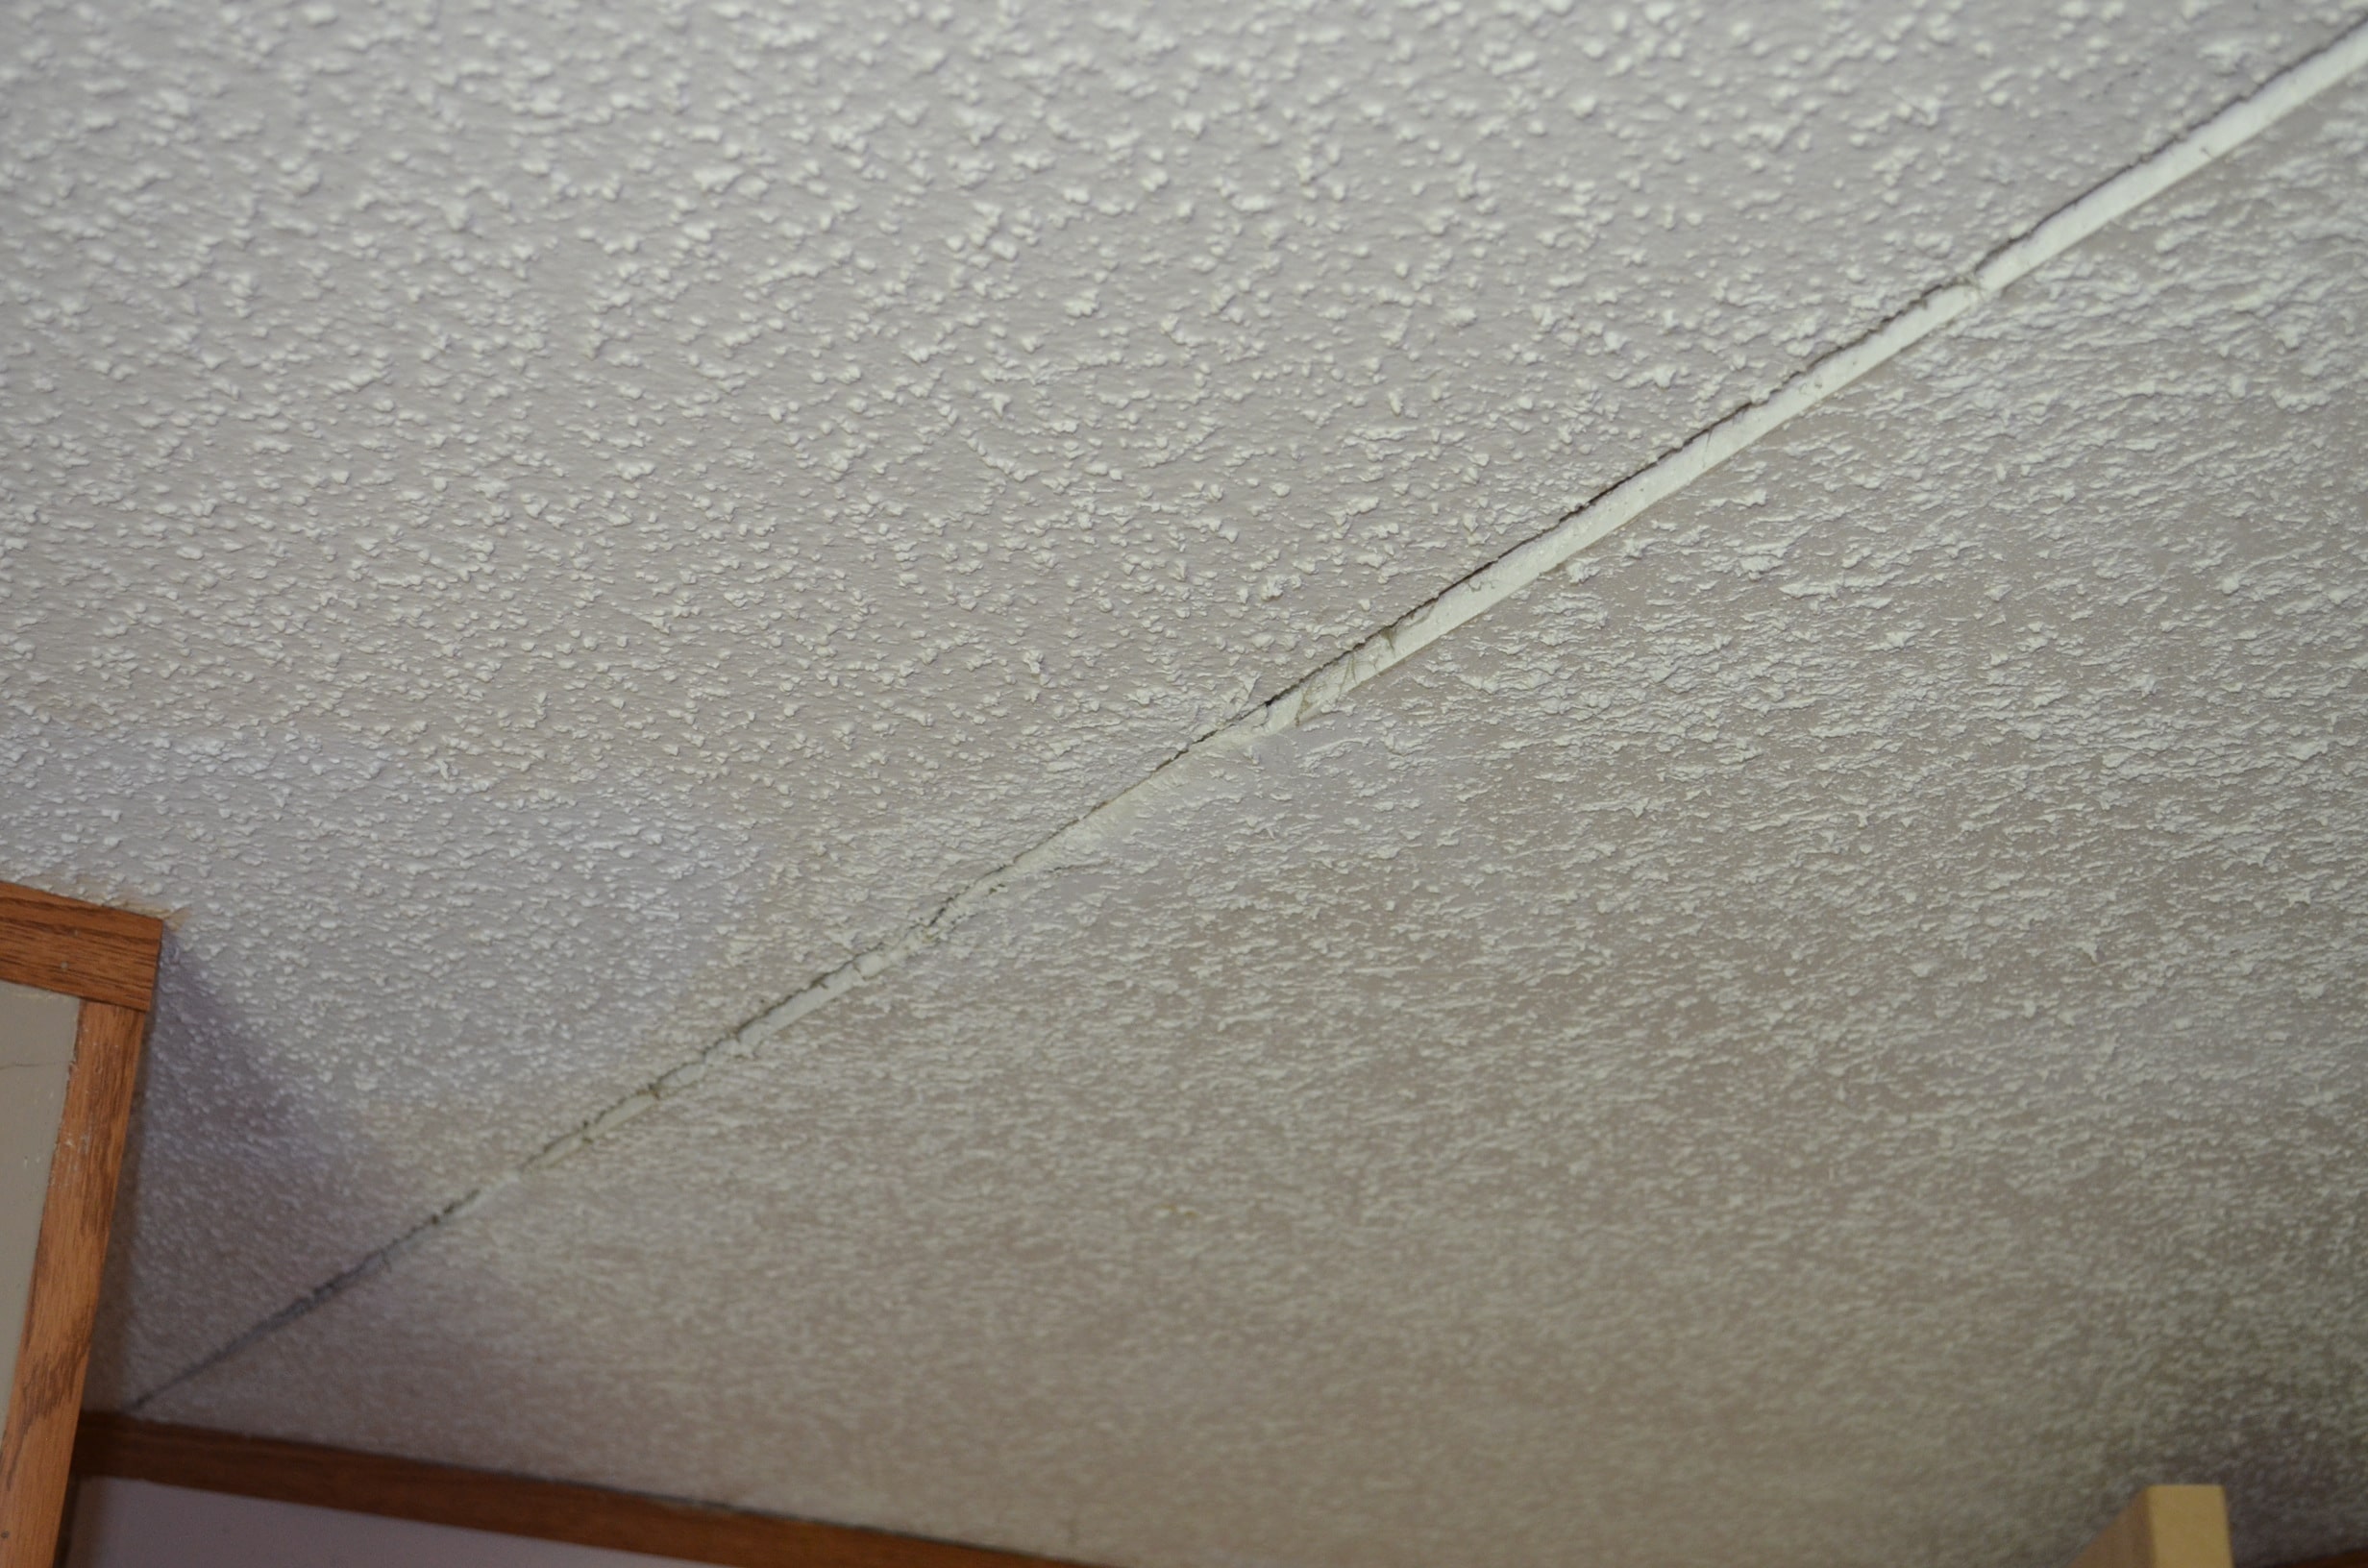 A stain from water damage on the ceiling